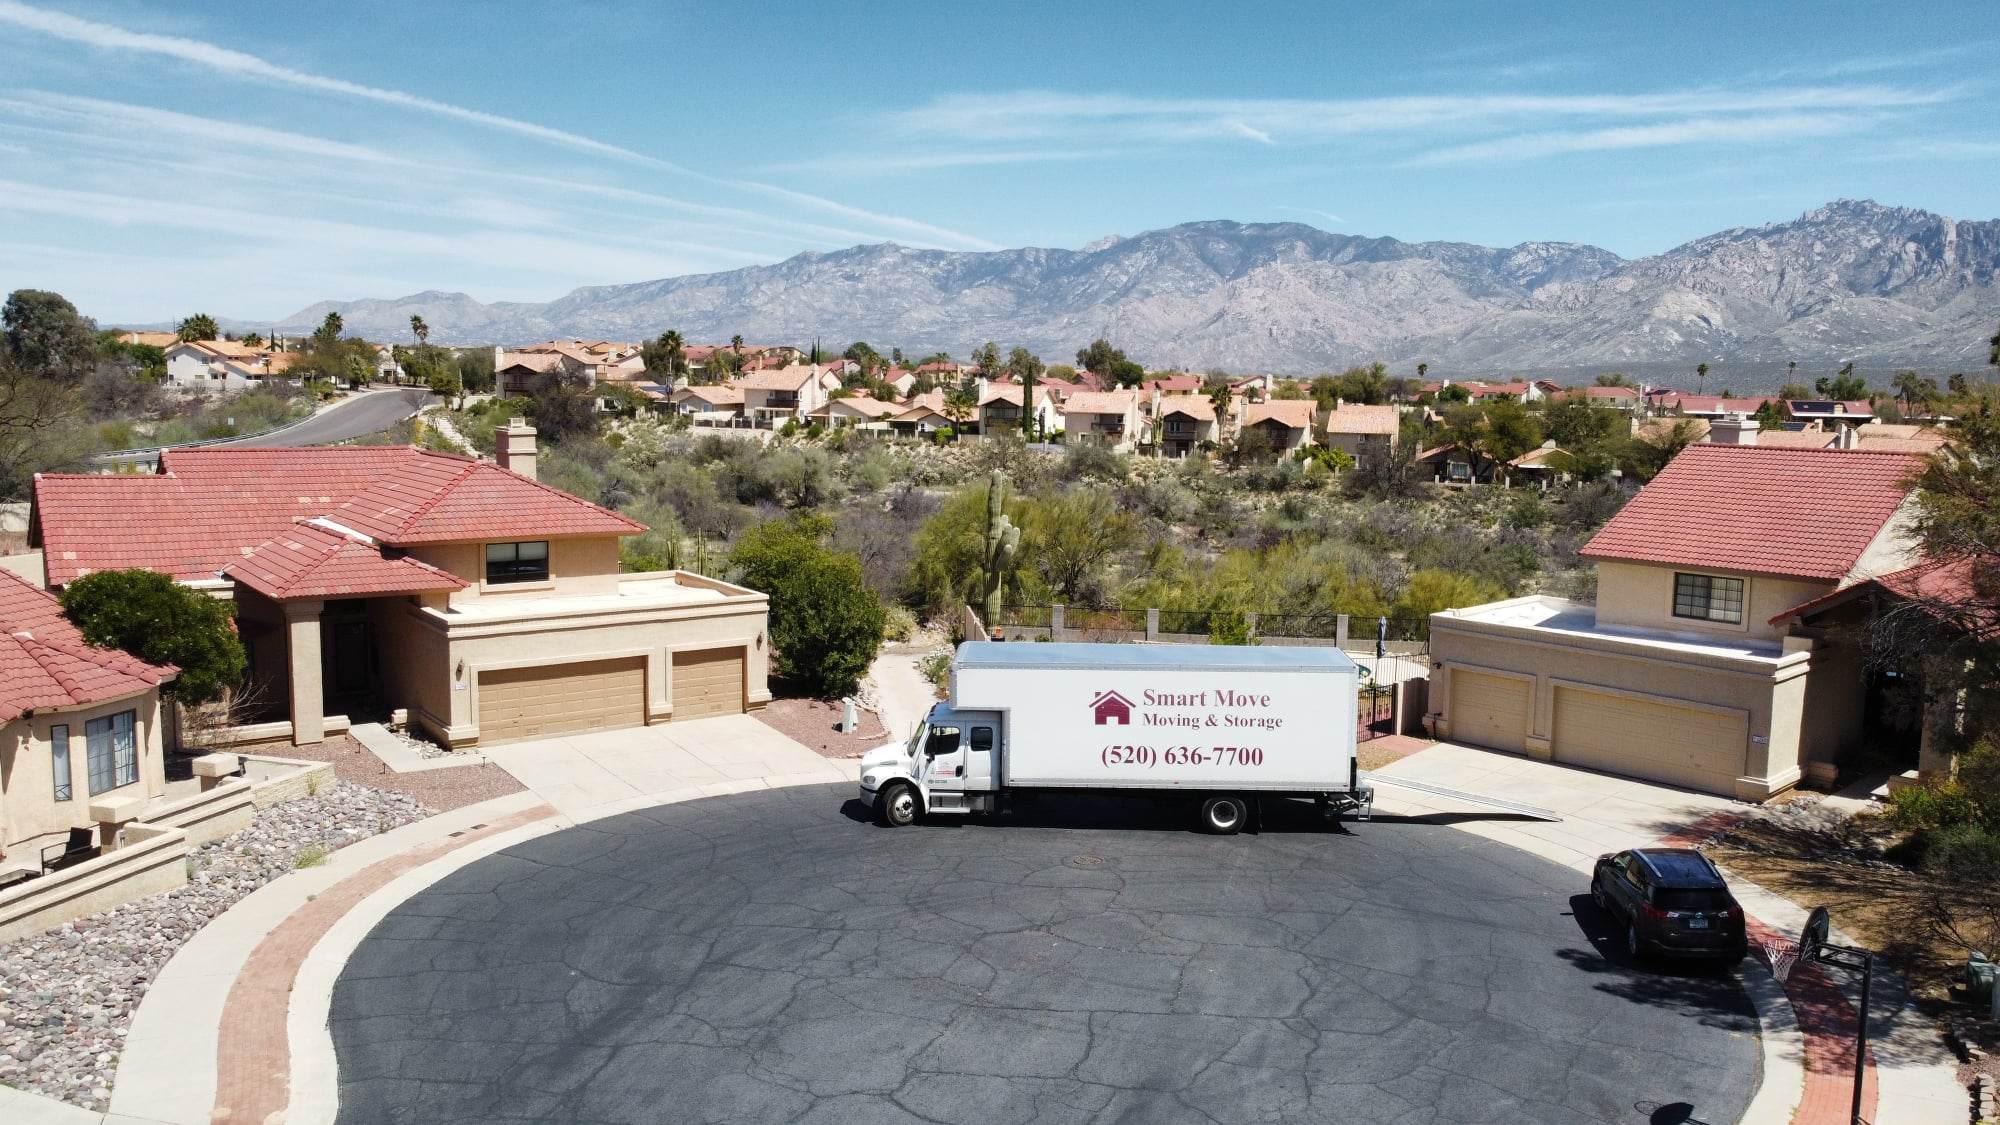 Smart Move Moving Quote Cost Tucson